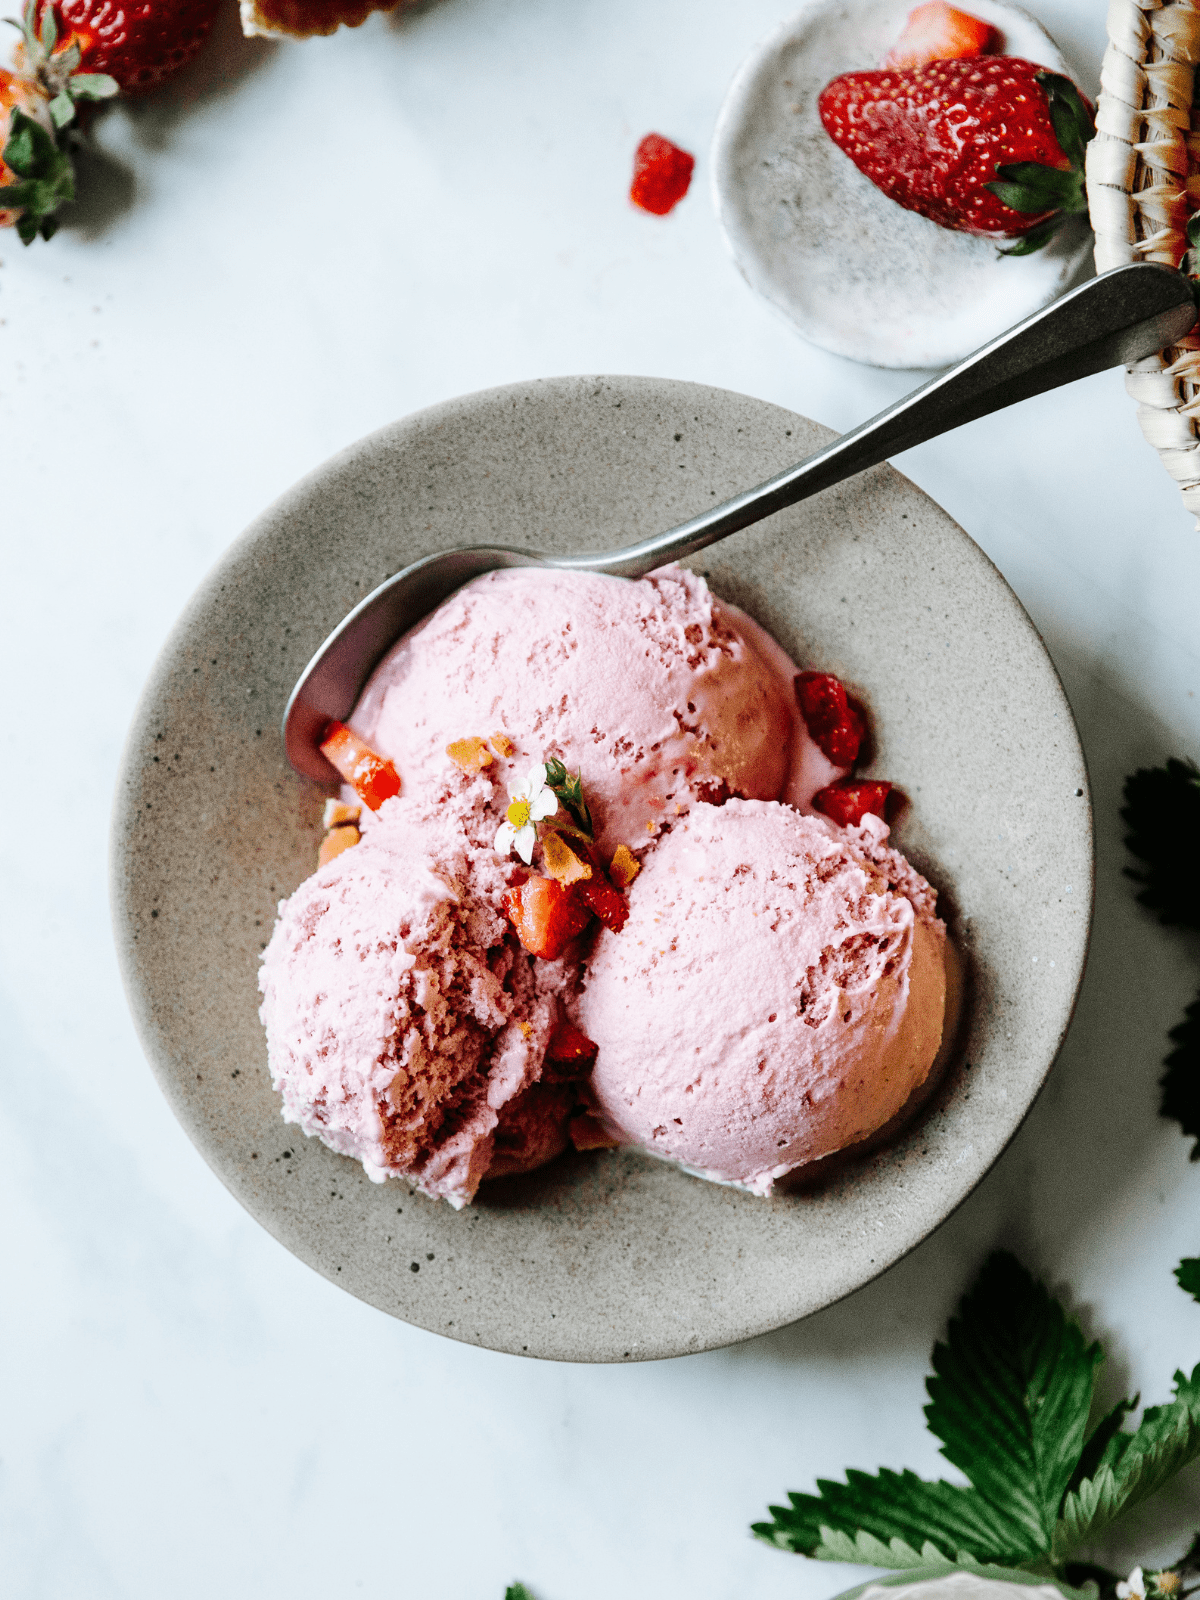 strawberry ice cream topped with fresh berries and mint leaves.